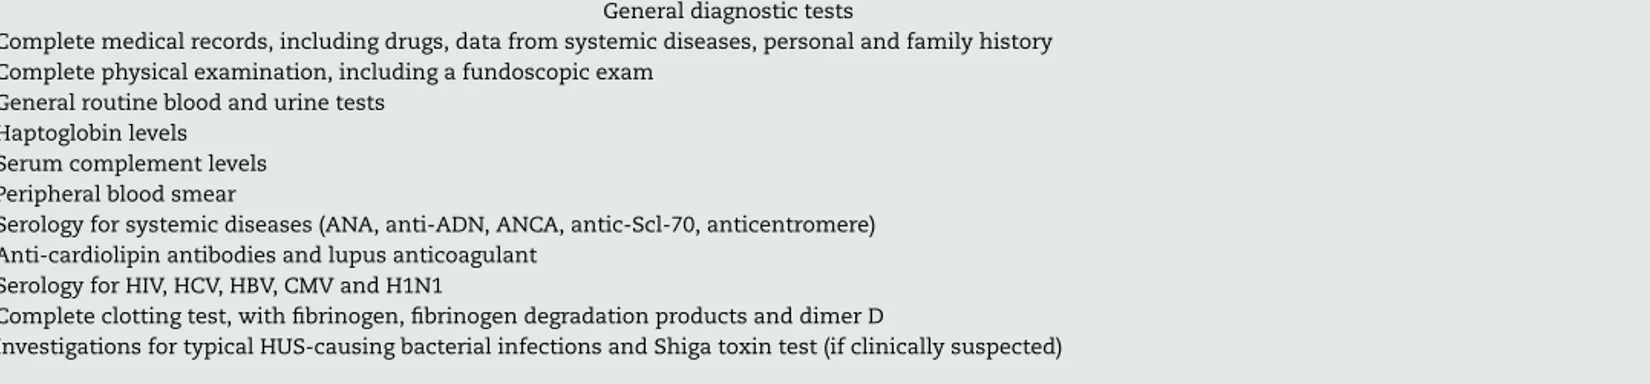 Table 3 – Diagnostic tests and procedures recommended for patients with thrombotic microangiopathy.